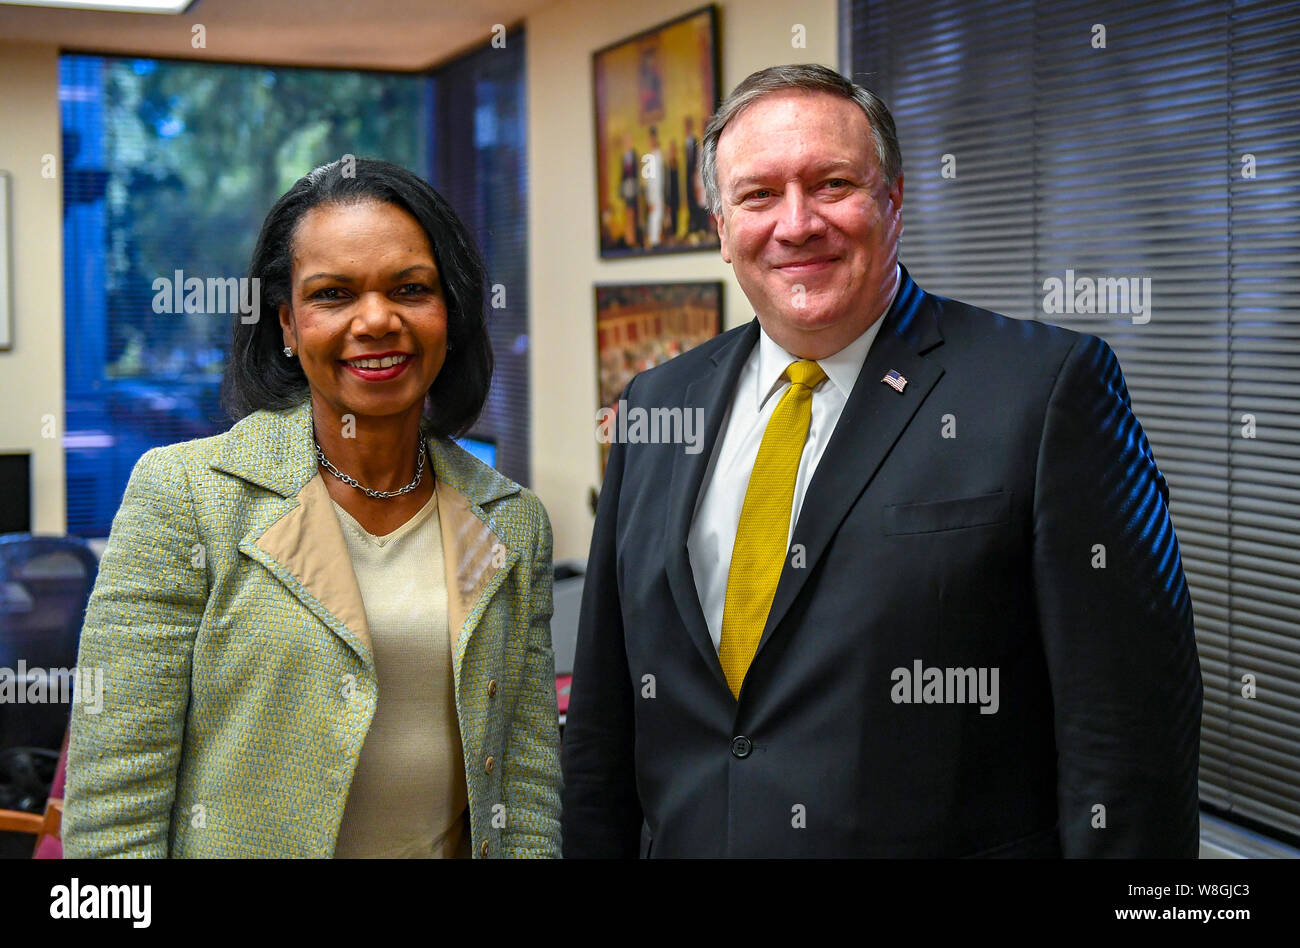 U.S. Secretary of State Michael R. Pompeo poses for a photo with former U.S. Secretary of State Condoleezza Rice at the Hoover Institution at Stanford Stock Photo